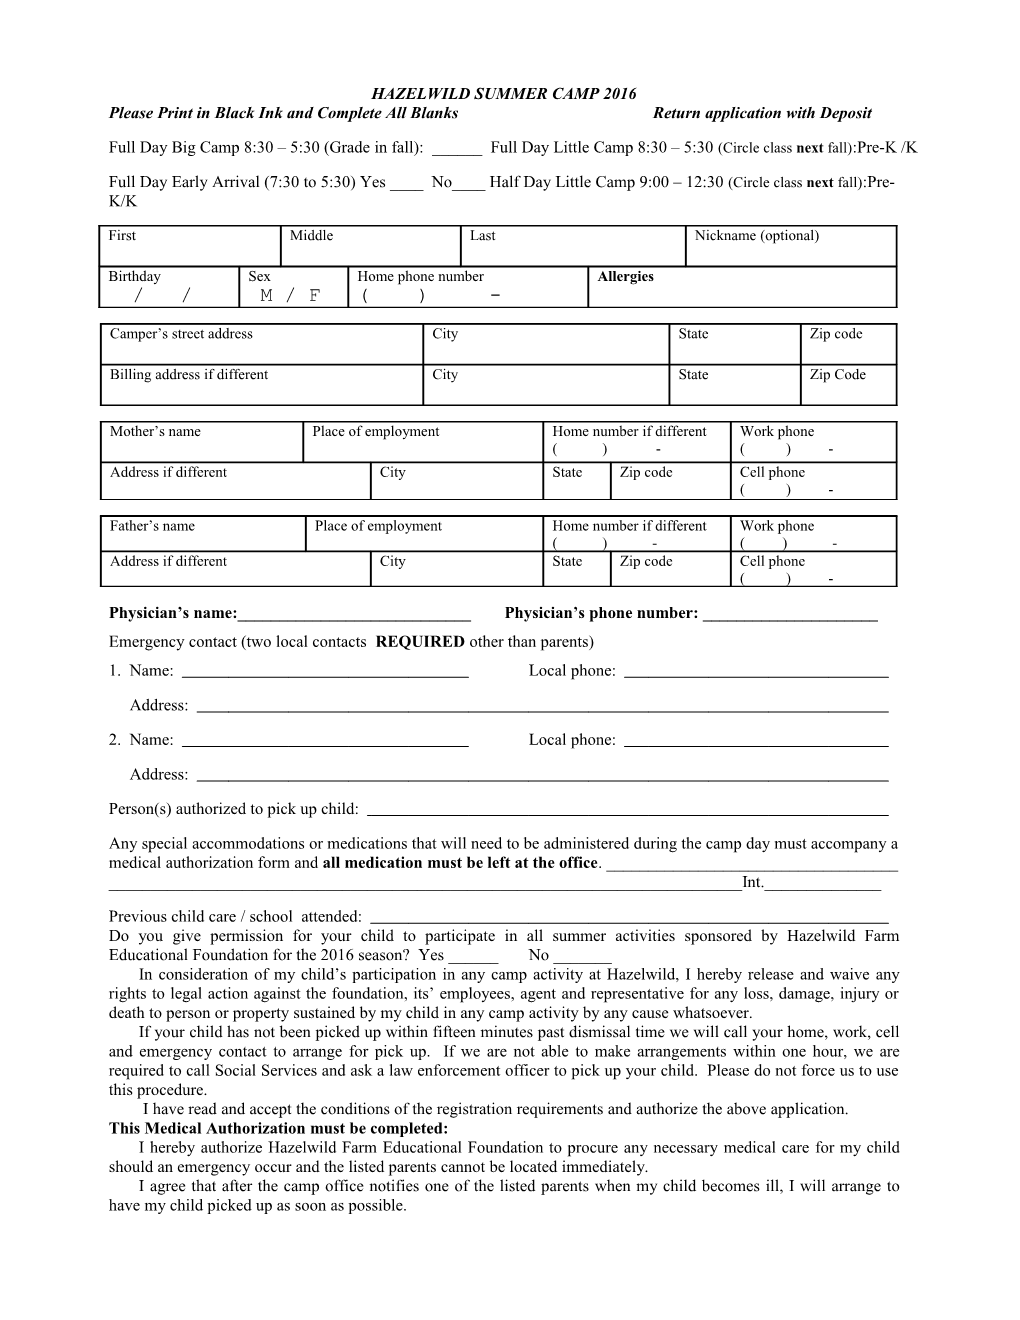 Application for Camp